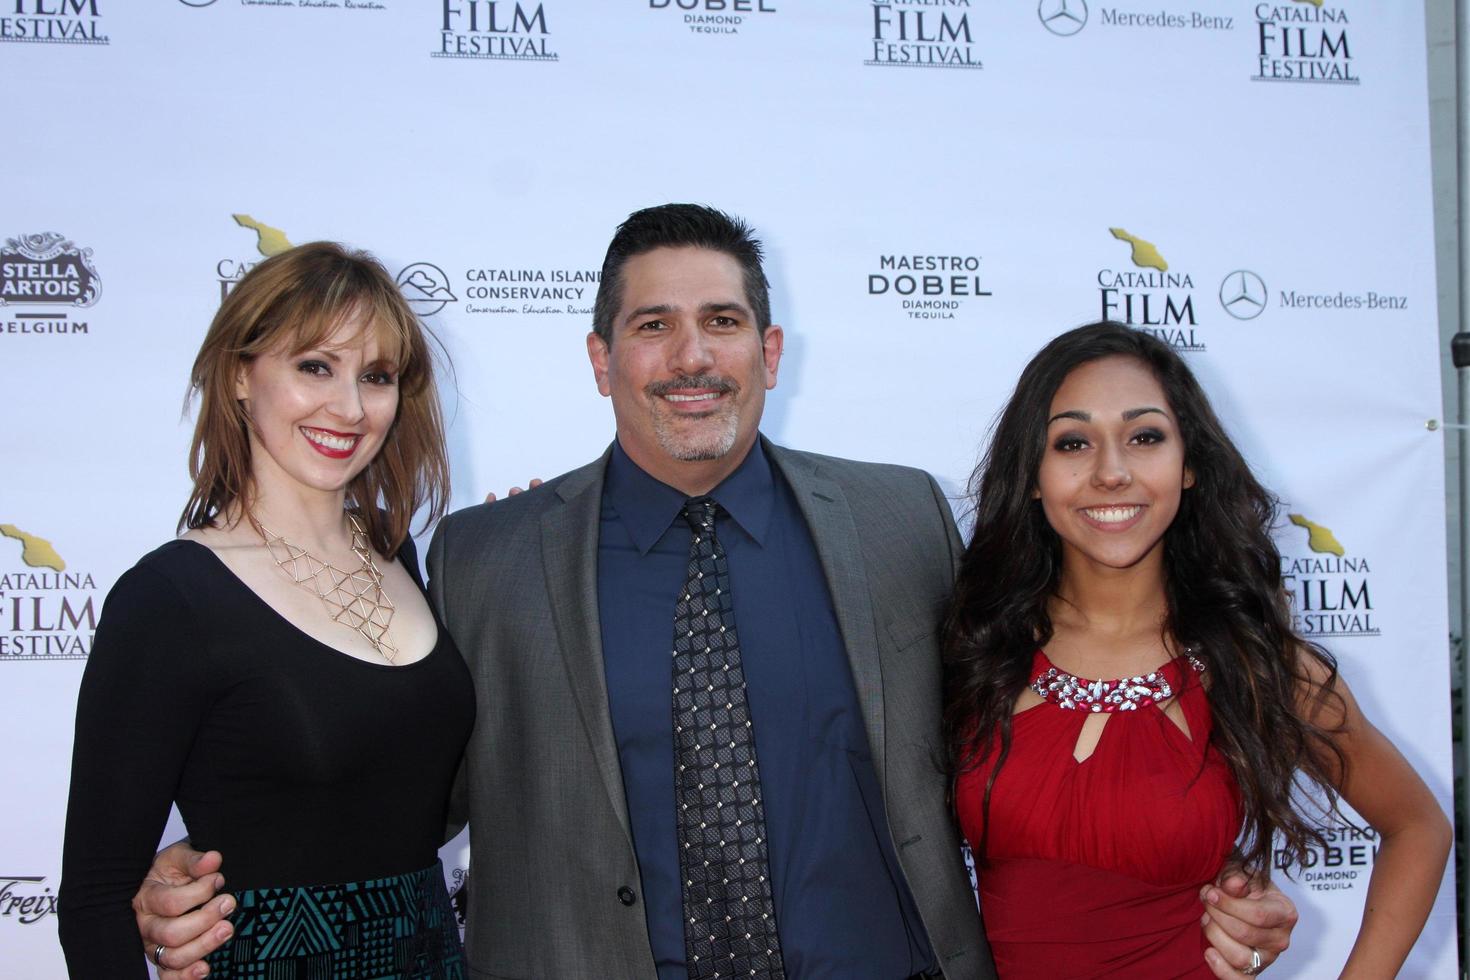 AVALON, SEP 27 - VIPS and Guests at the Catalina Film Festival Gala at the Casino on September 27, 2014 in Avalon, Catalina Island, CA photo